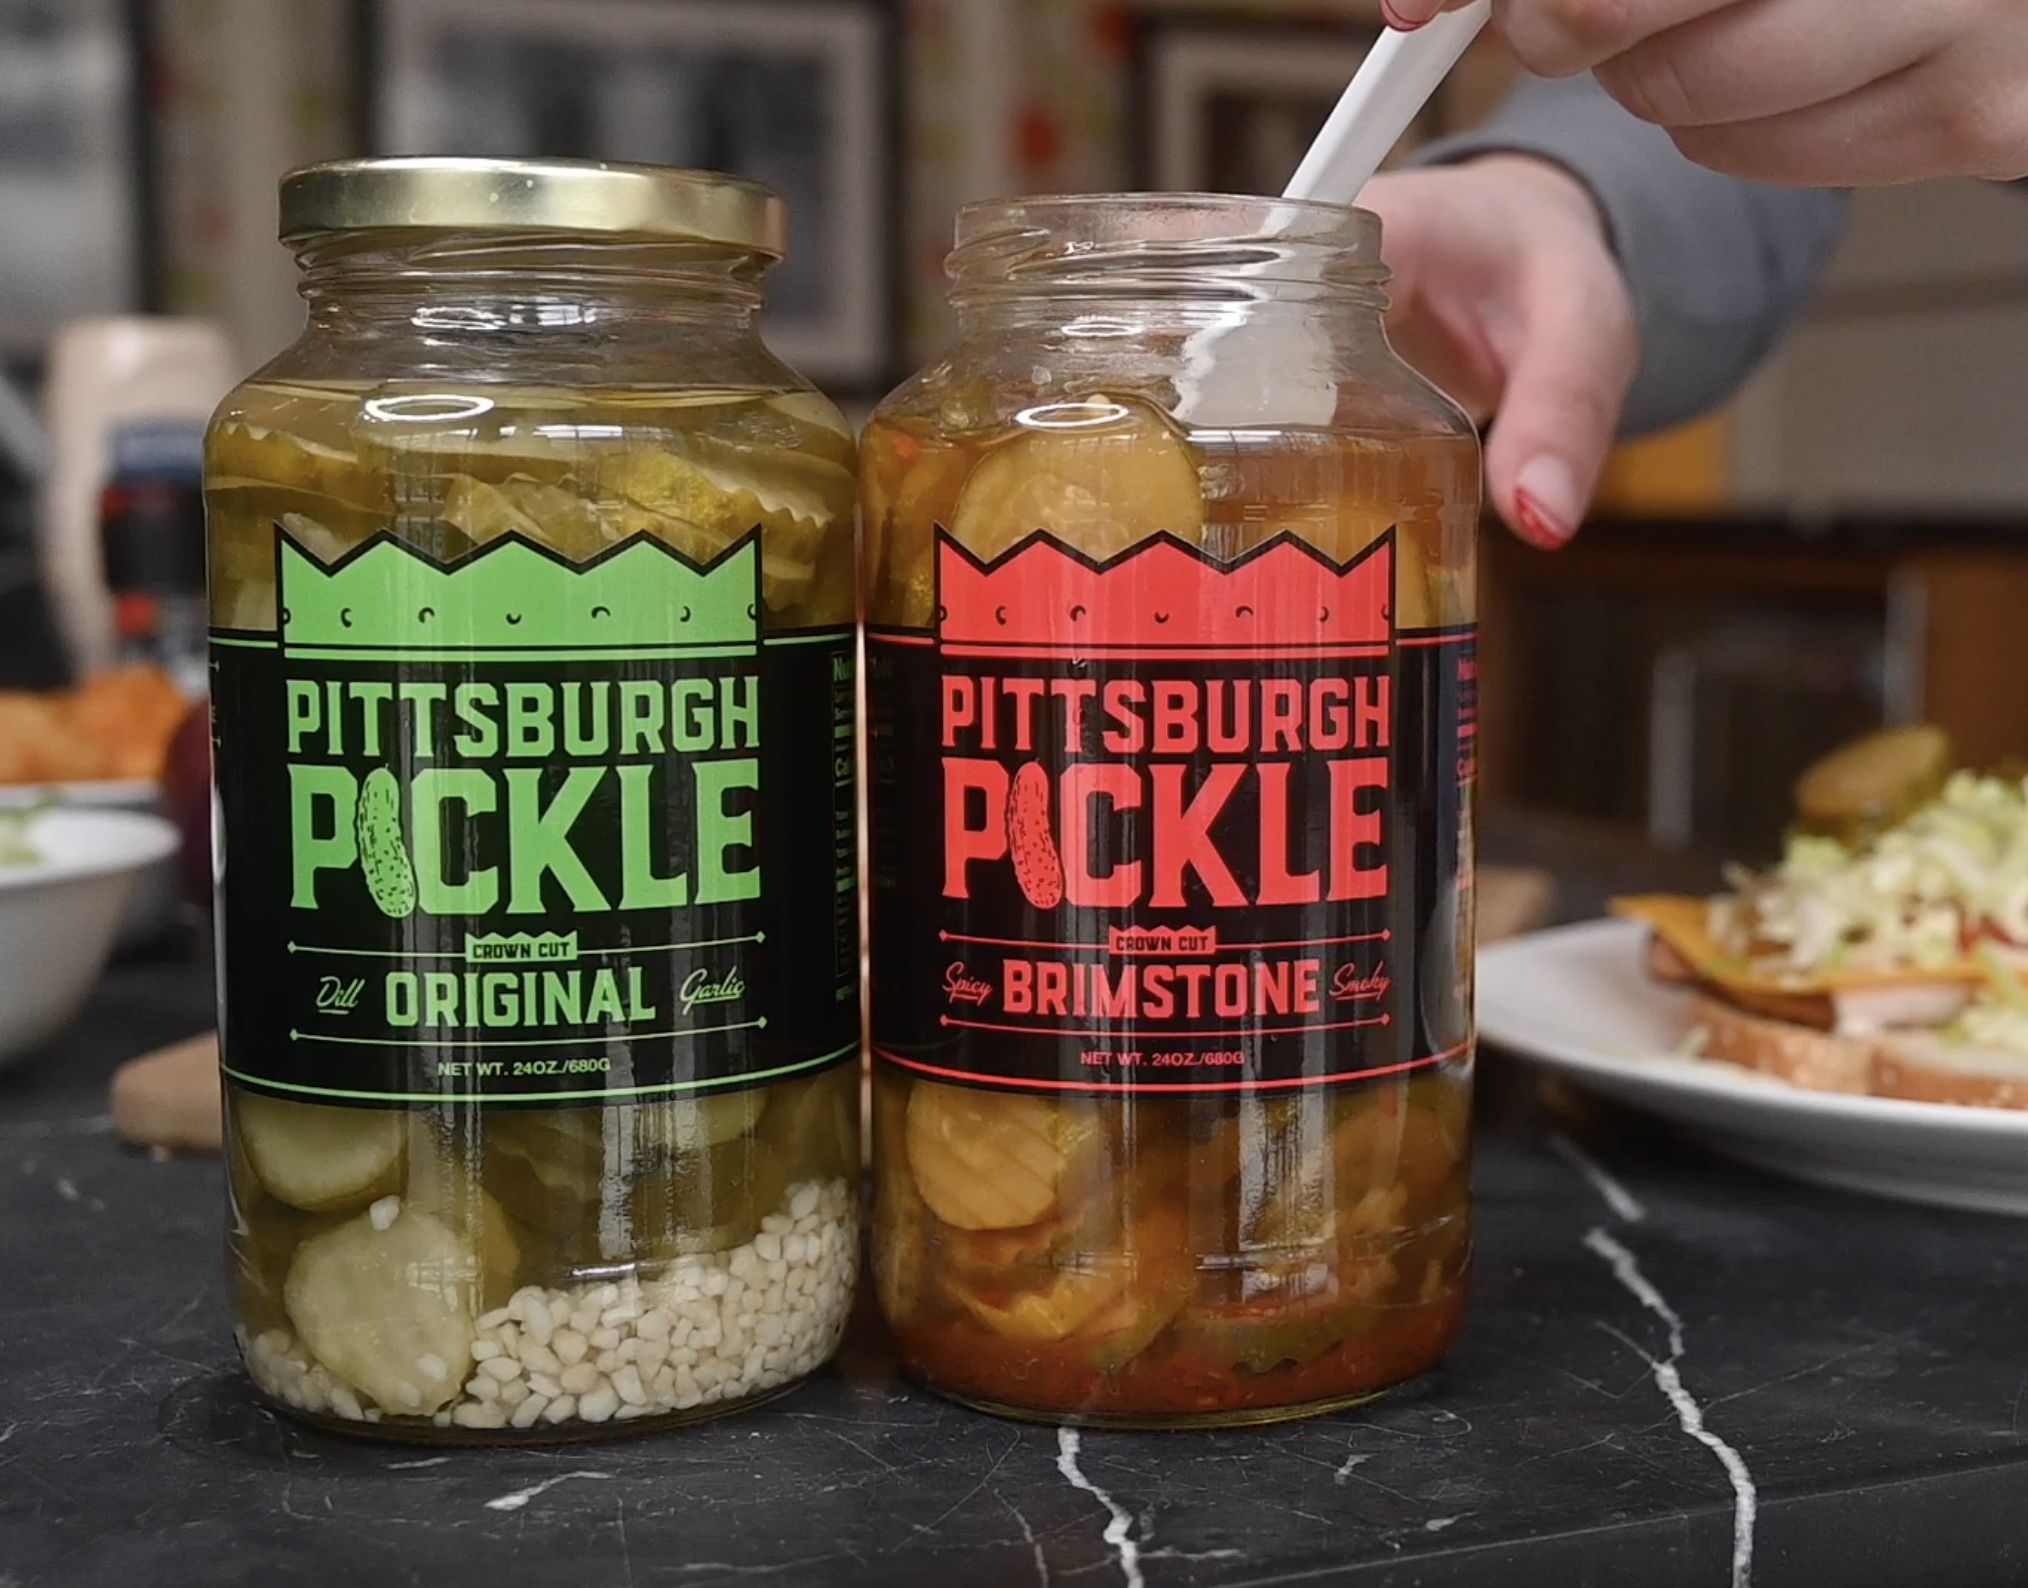 There’s A New Pickle In Town Meet Pittsburgh Pickle Company’s New (And